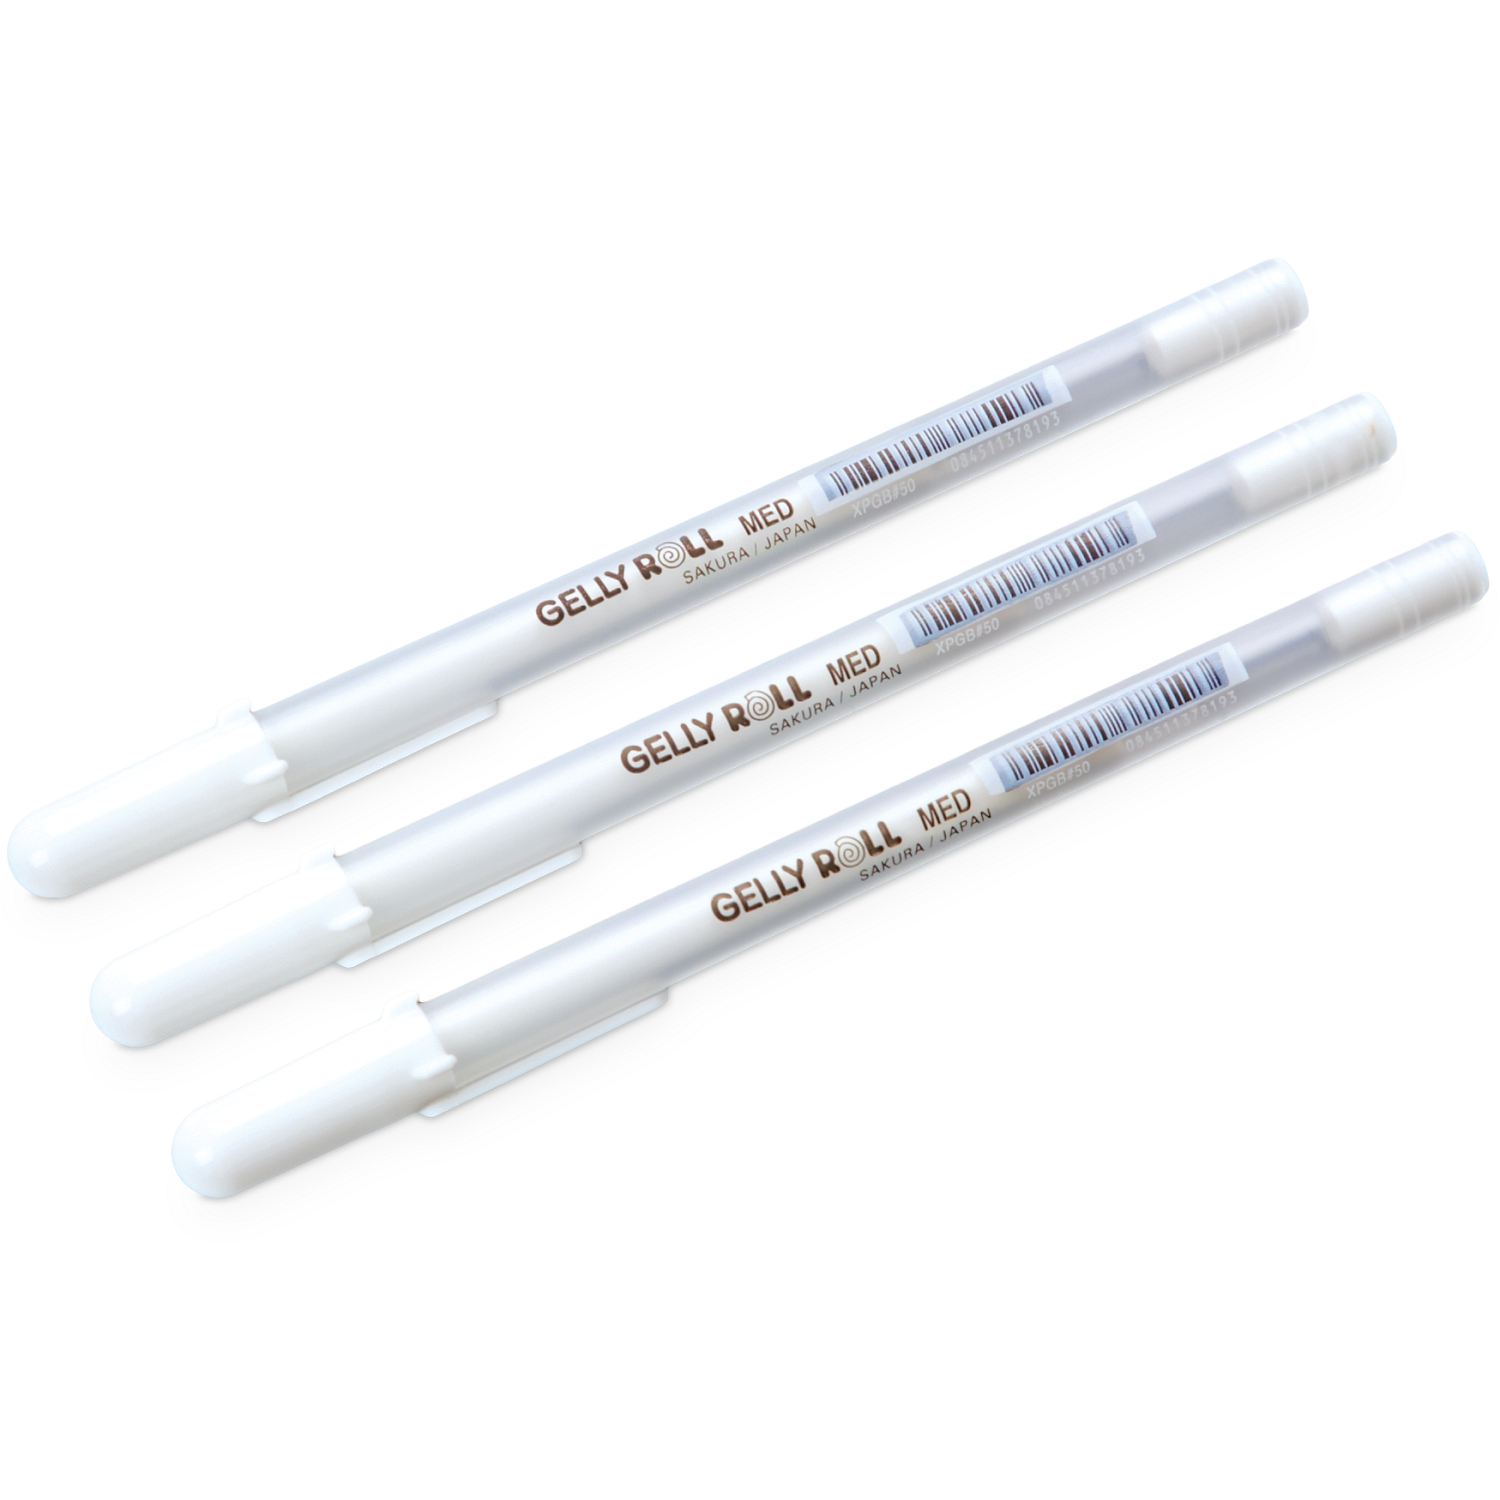 Sakura® Gelly Roll® Classic™ Gel Pens (3-Pack), Labeling & Supplies, Artifact & Collectibles Preservation, Preservation